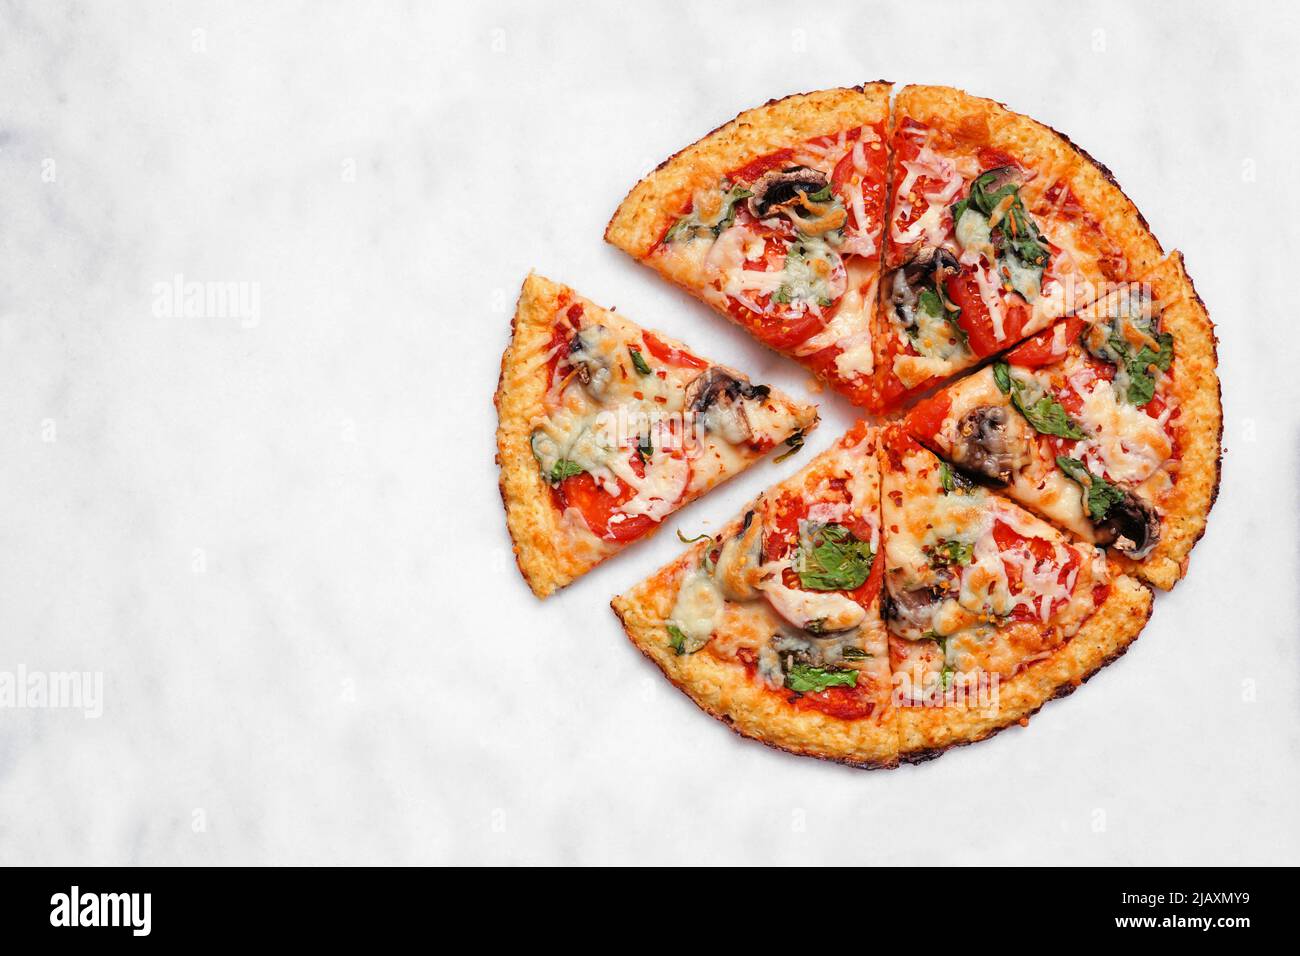 Healthy, gluten free cauliflower crust pizza with tomatoes, mushrooms and spinach. Overhead view with cut slices on a white marble background. Stock Photo